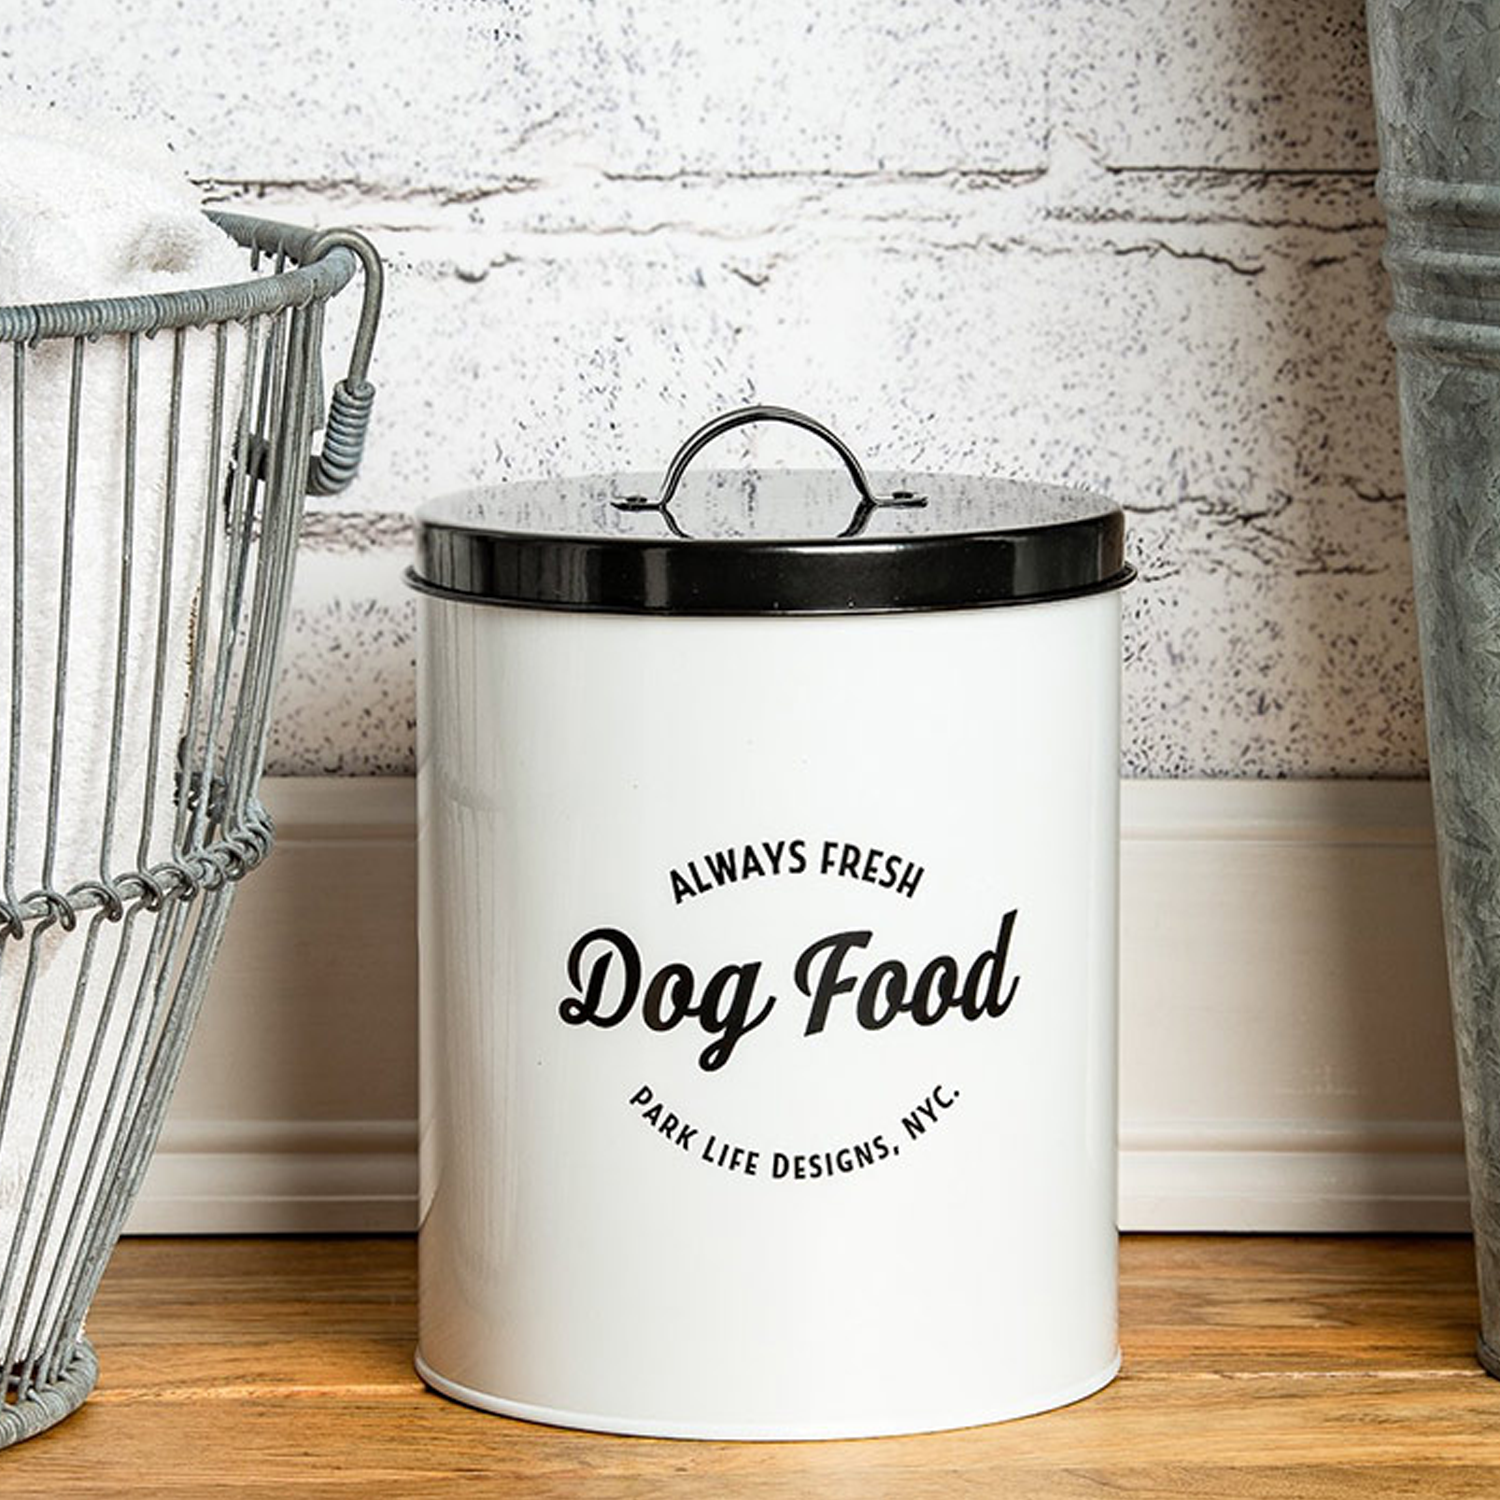 Pet Boutique - Dog Dining - Wallace Dog Food Canister by Park Life Designs